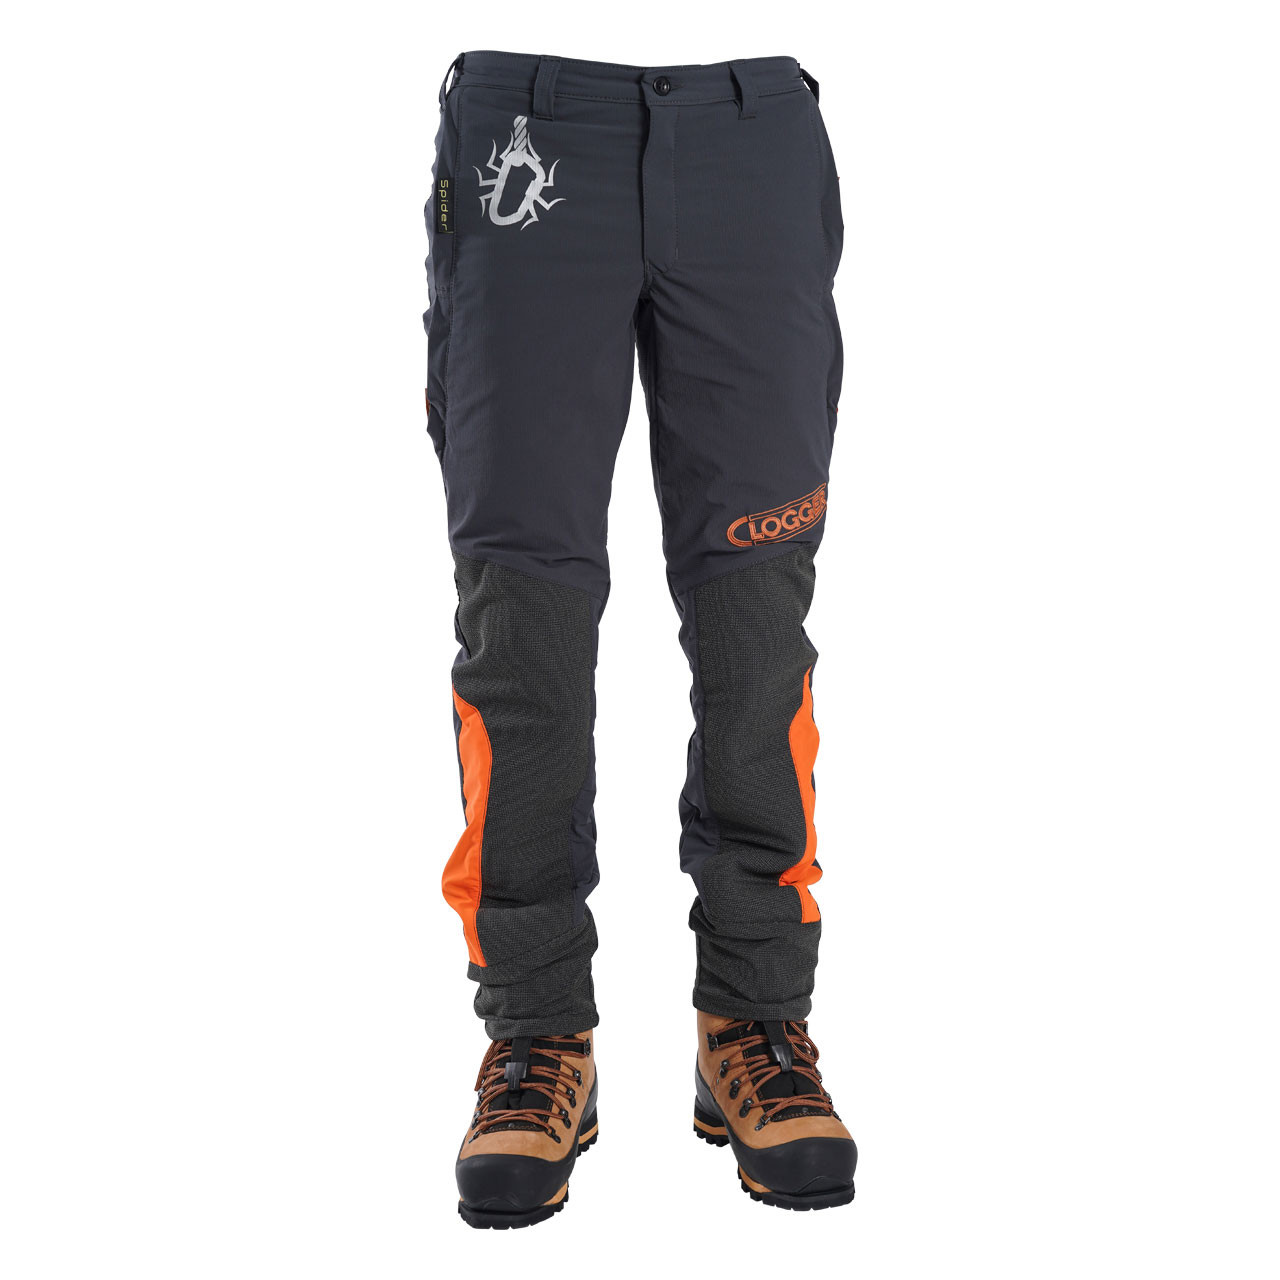 https://cdn11.bigcommerce.com/s-d7s57wujlx/images/stencil/1280x1280/products/277/2971/Clogger_Spider_Trousers_Contrast_Front__33375.1675214290.jpg?c=2